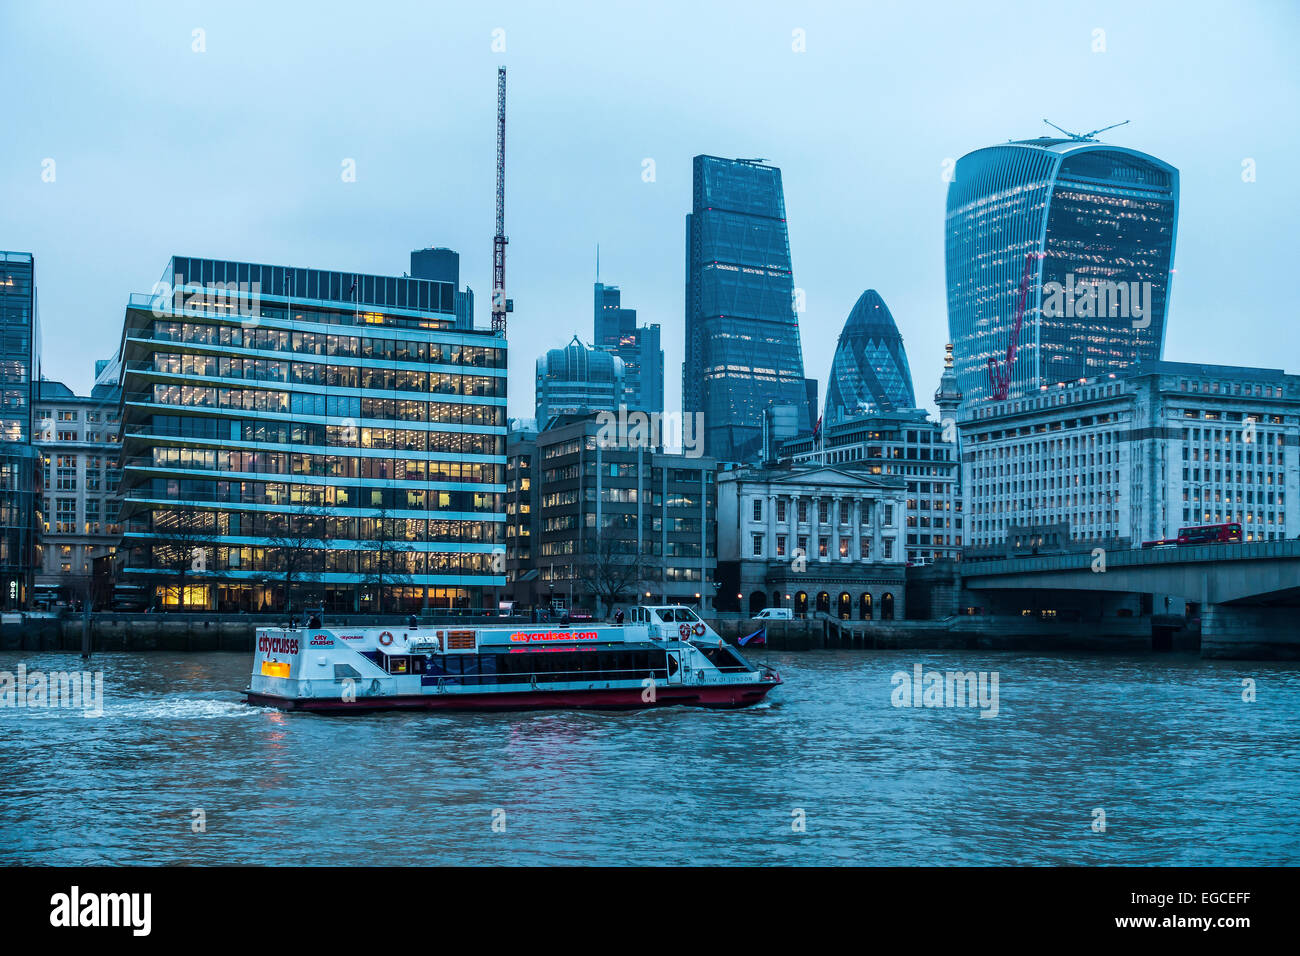 The City in the background.  Winter Boat Cruise on the Thames, London UK Stock Photo